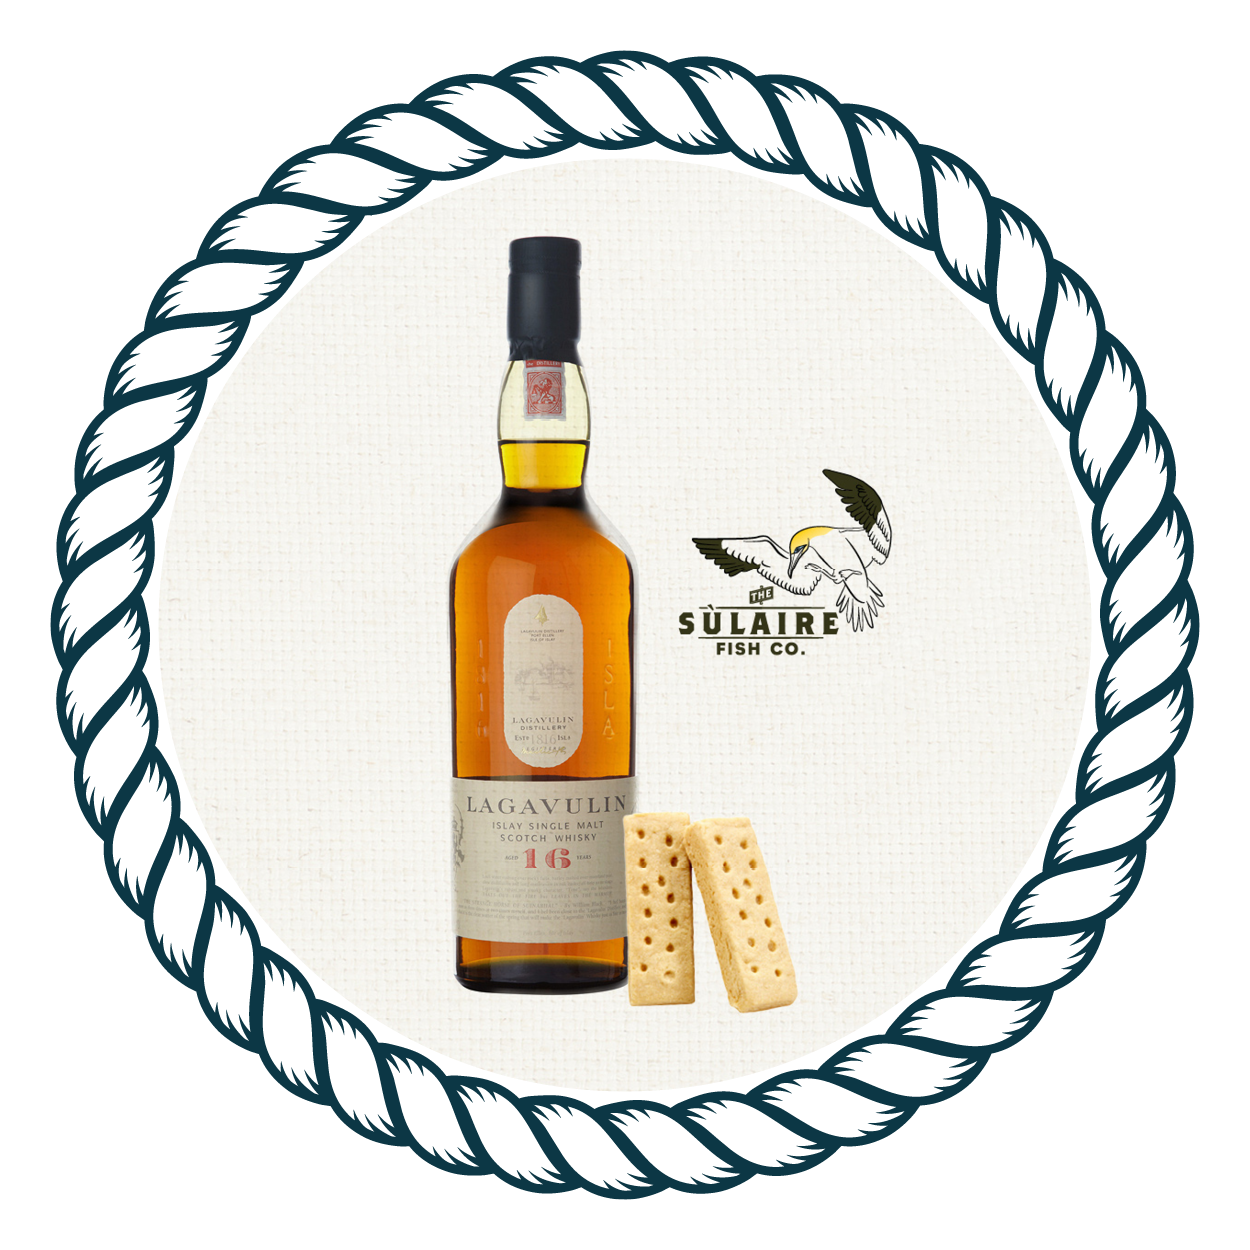 sulaire win a bottle of Lagavulin single malt scotch whisky competition image in rope border